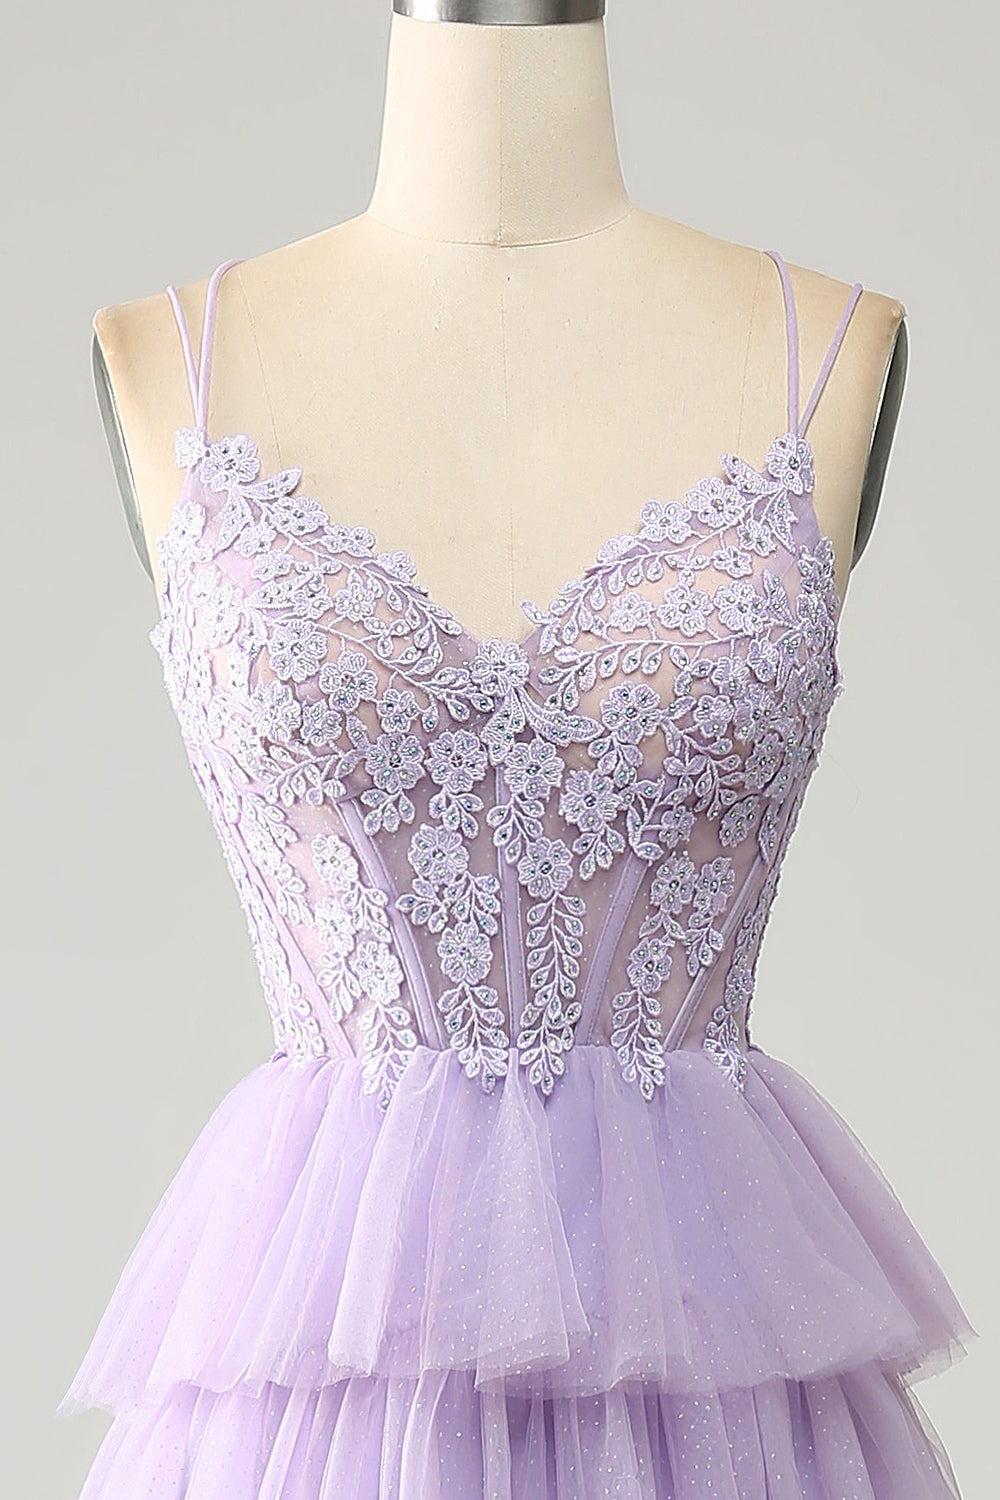 Zapakasa Women Lilac Tulle Tiered Princess Corset Prom Dress with